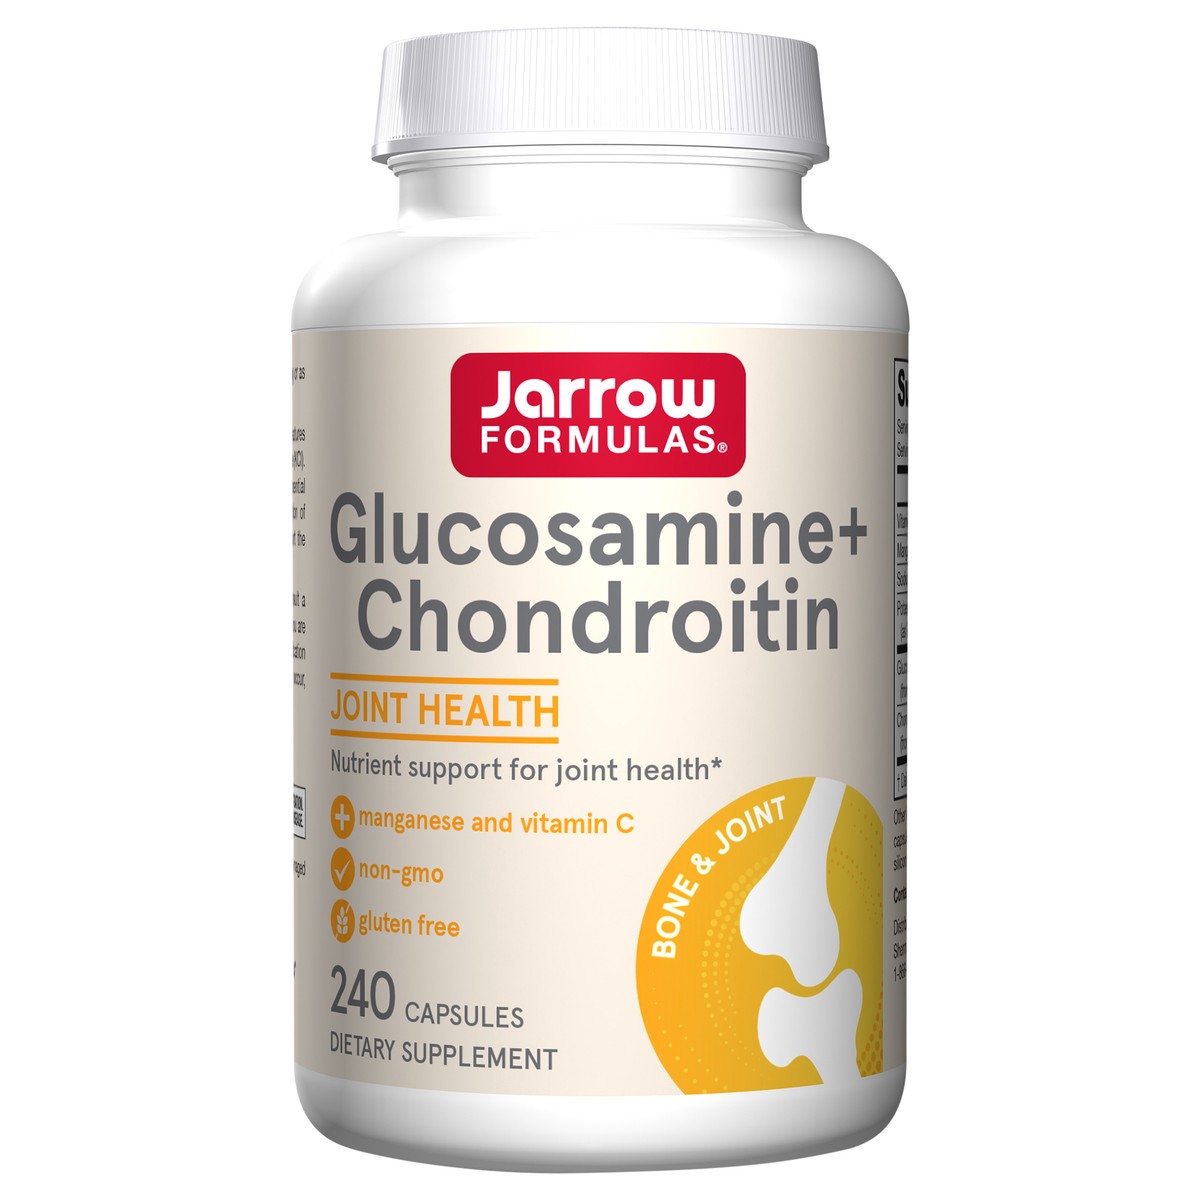 slide 2 of 5, Jarrow Formulas Glucosamine + Chondroitin - 240 Capsules - Nutrient Support - Dietary Supplement for Joint Health - With Vitamin C & Manganese - 60 Servings, 240 ct